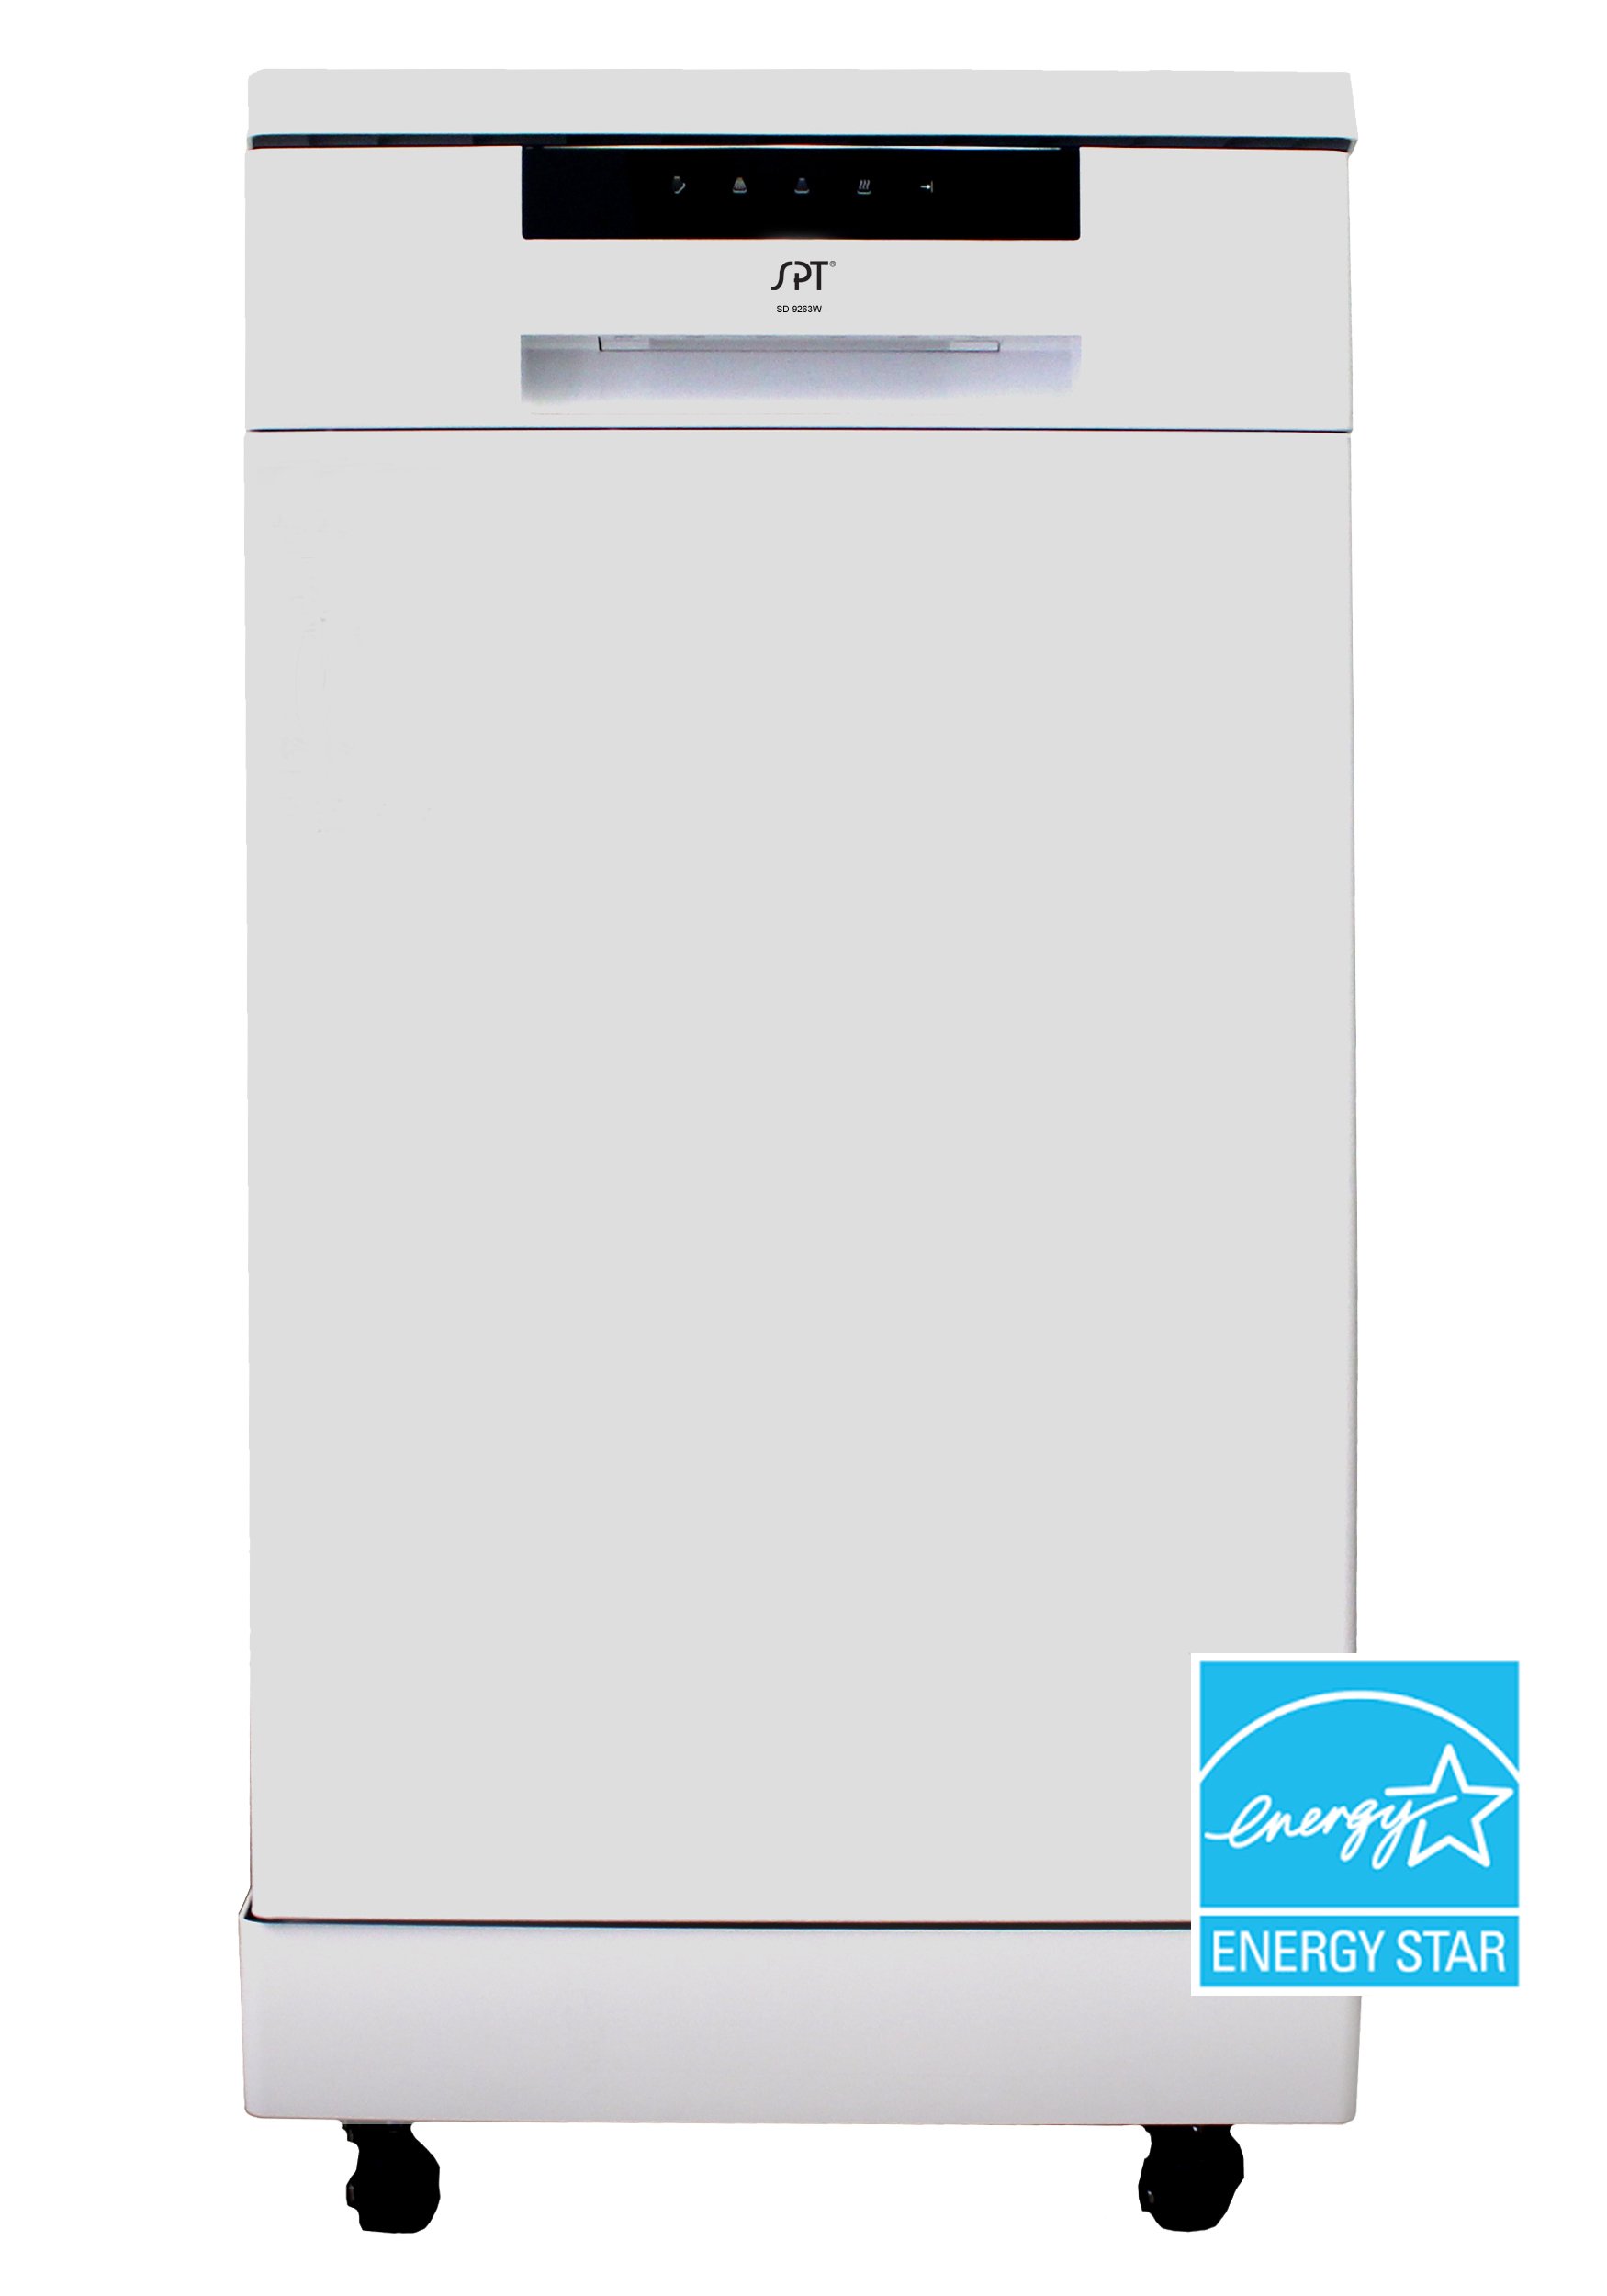 Sunpentown 18" Portable Dishwasher with Energy Star - White